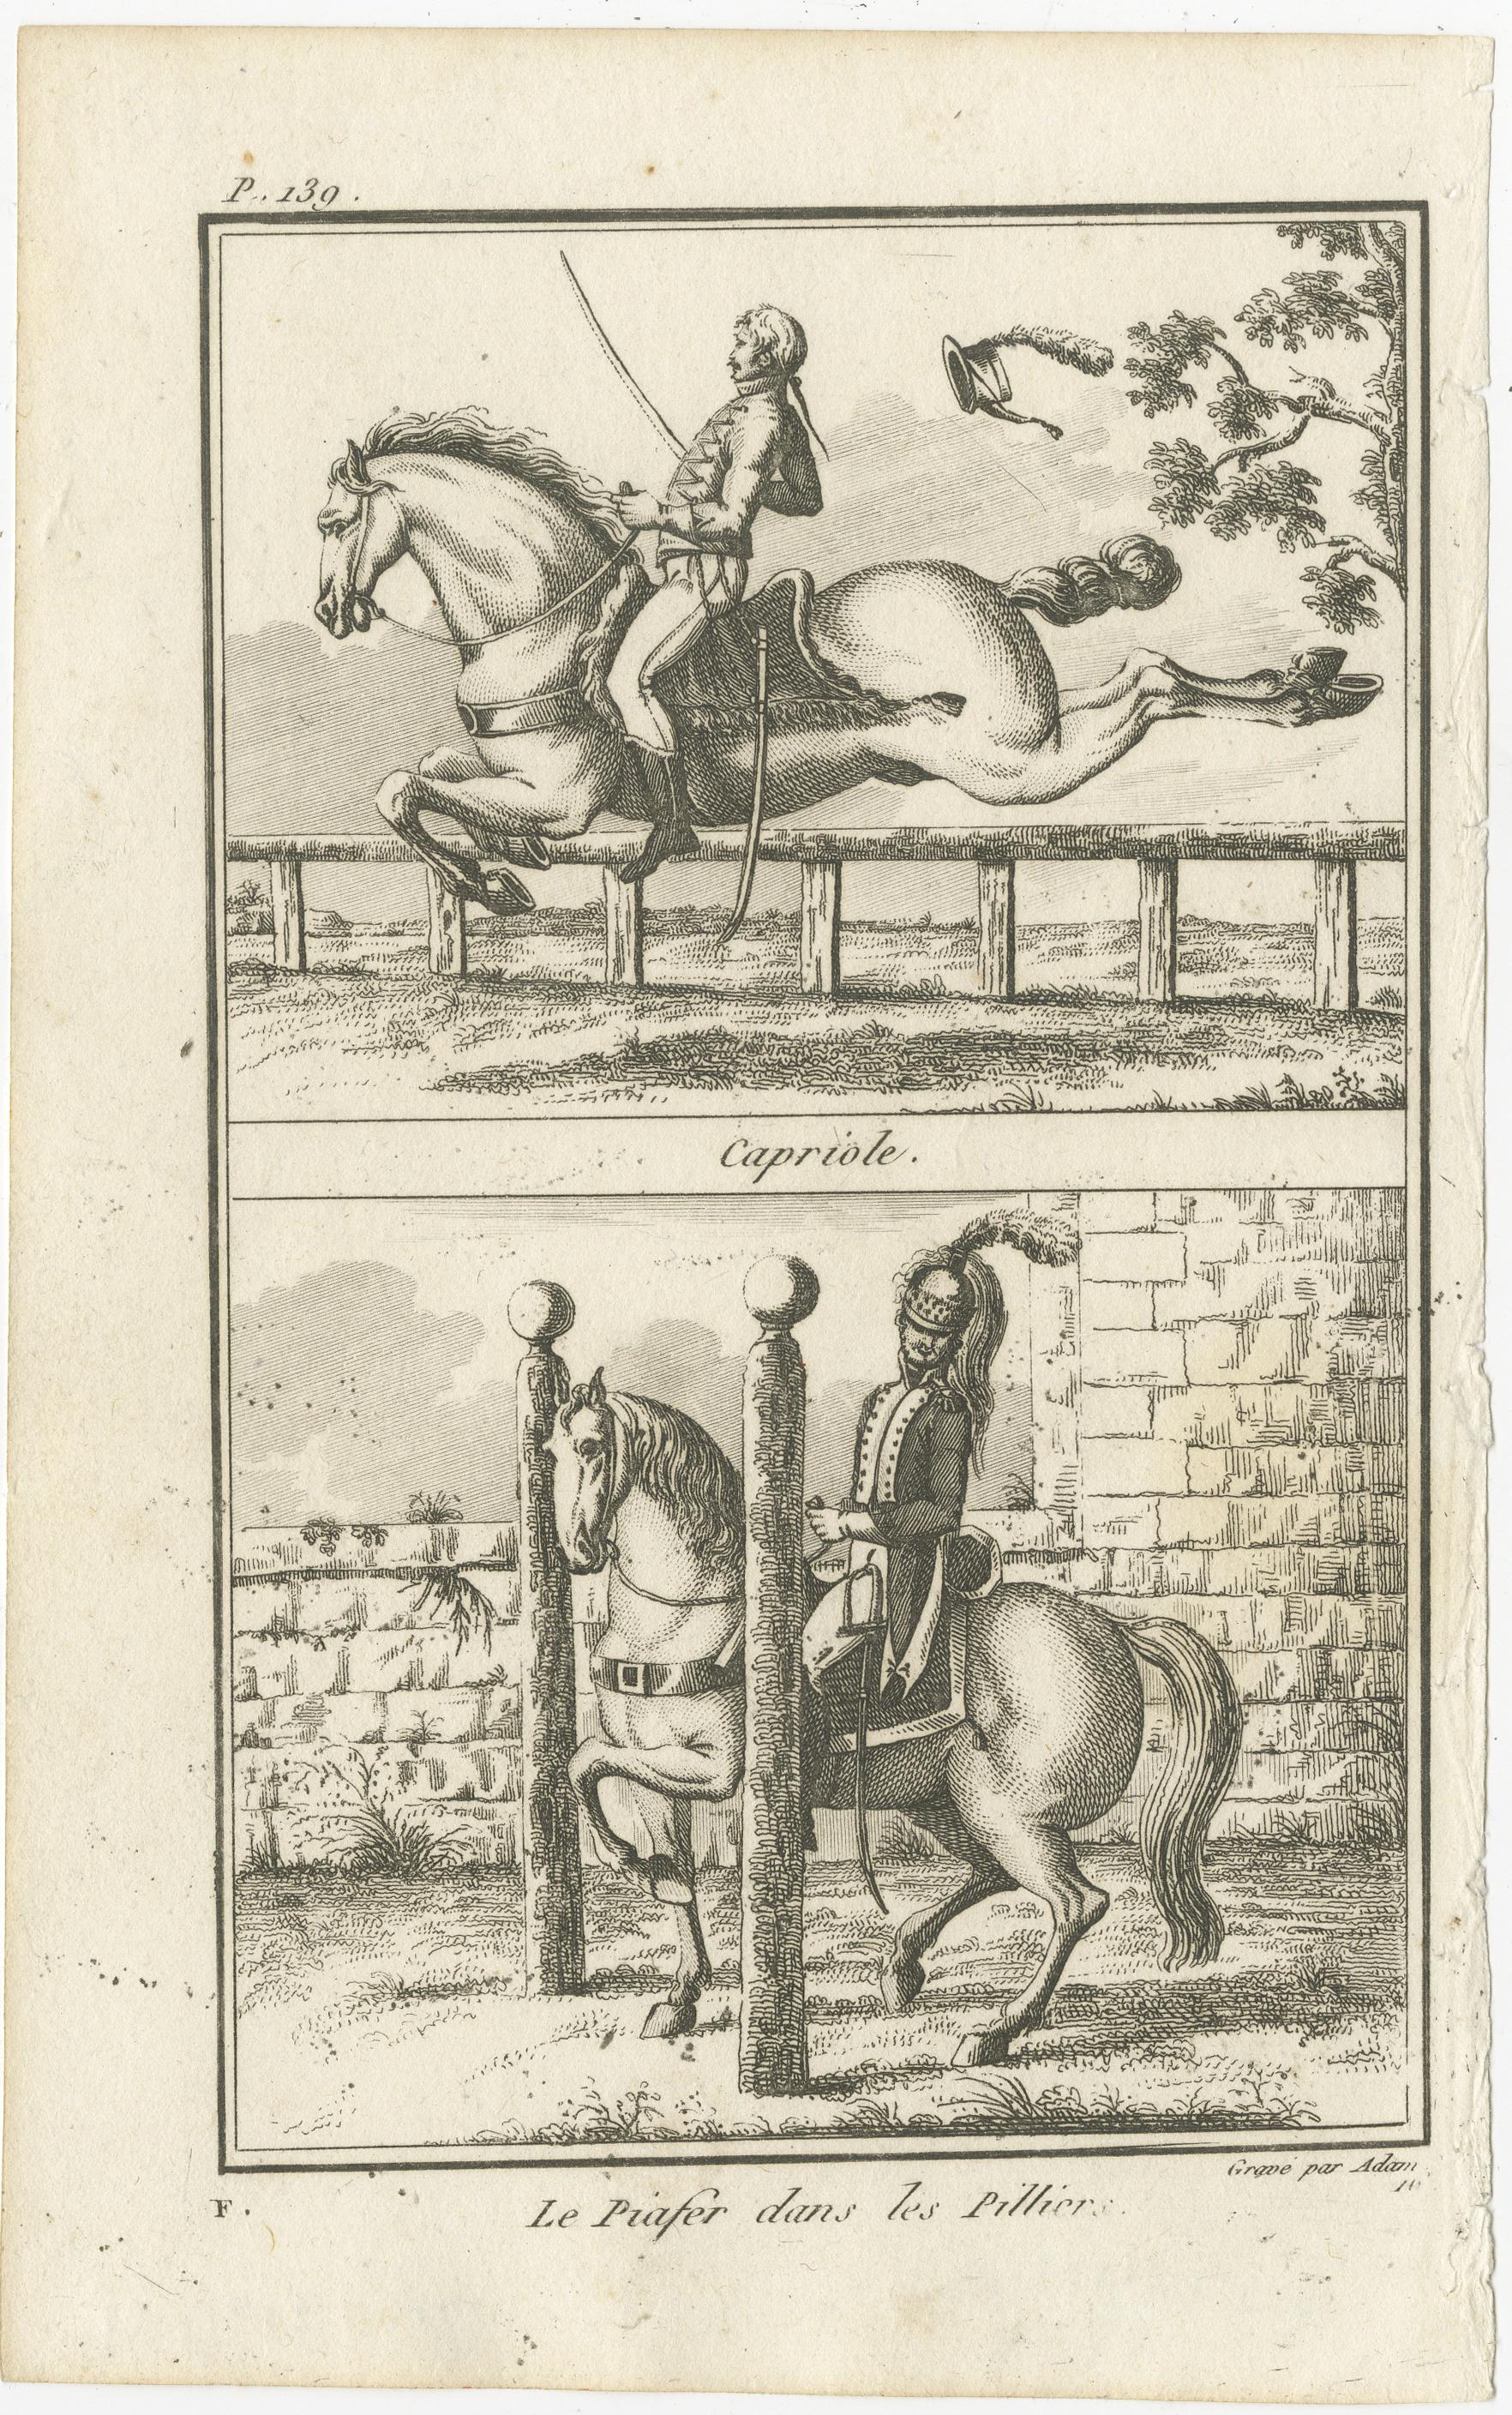 Set of six horse riding prints including Le Pas, Capriole, Balotade, Mezair, Le Passage, Courbette and many more. Two images on one sheet, each with a rider on horseback performing the specific riding figure. These prints originate from 'École de